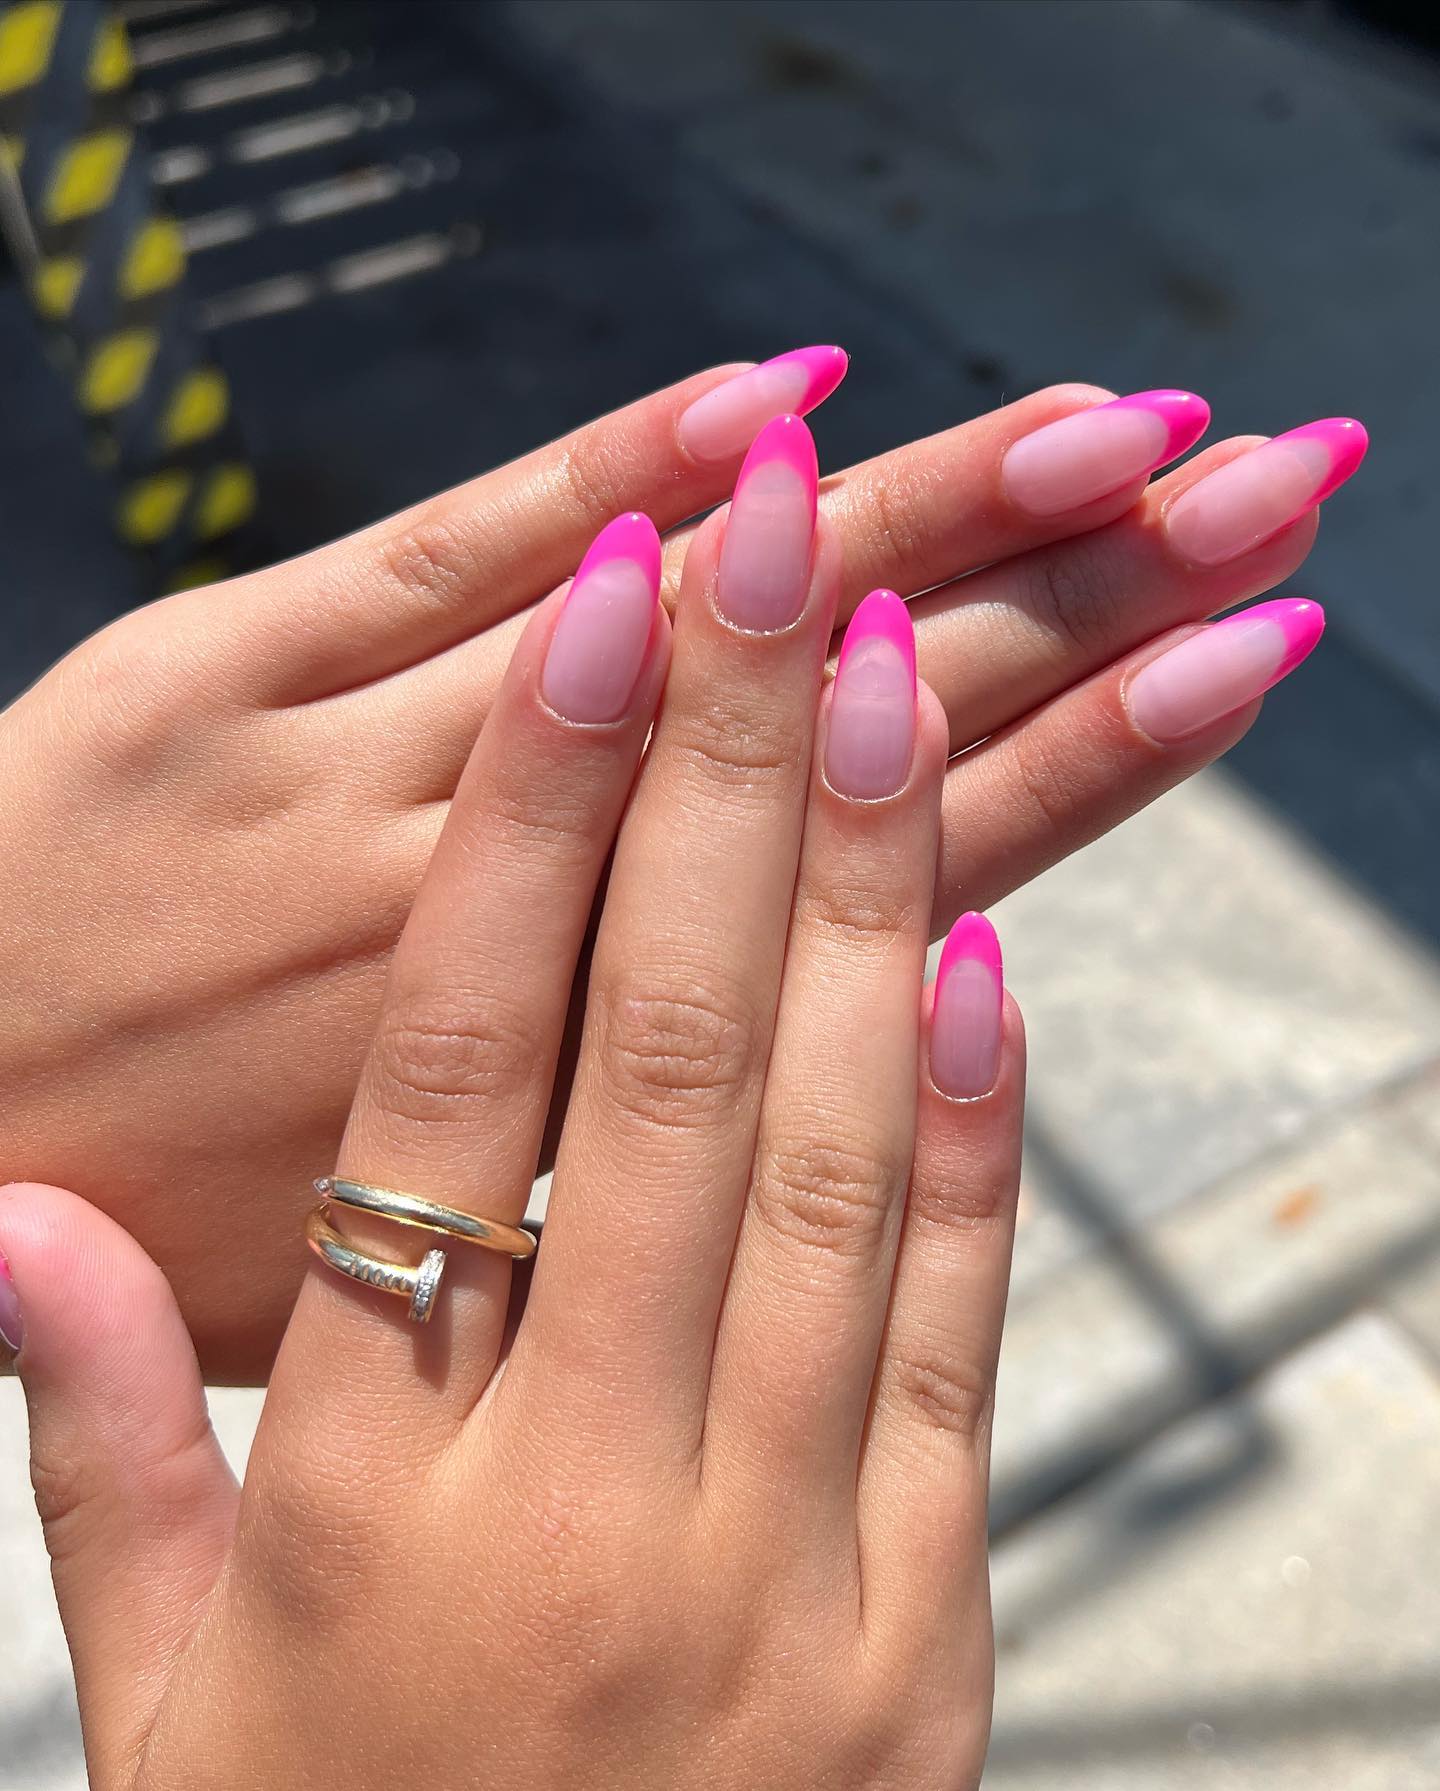 20 Best Summer Nail Colors 2021 - Summer Nail Polish Color Trends to Try